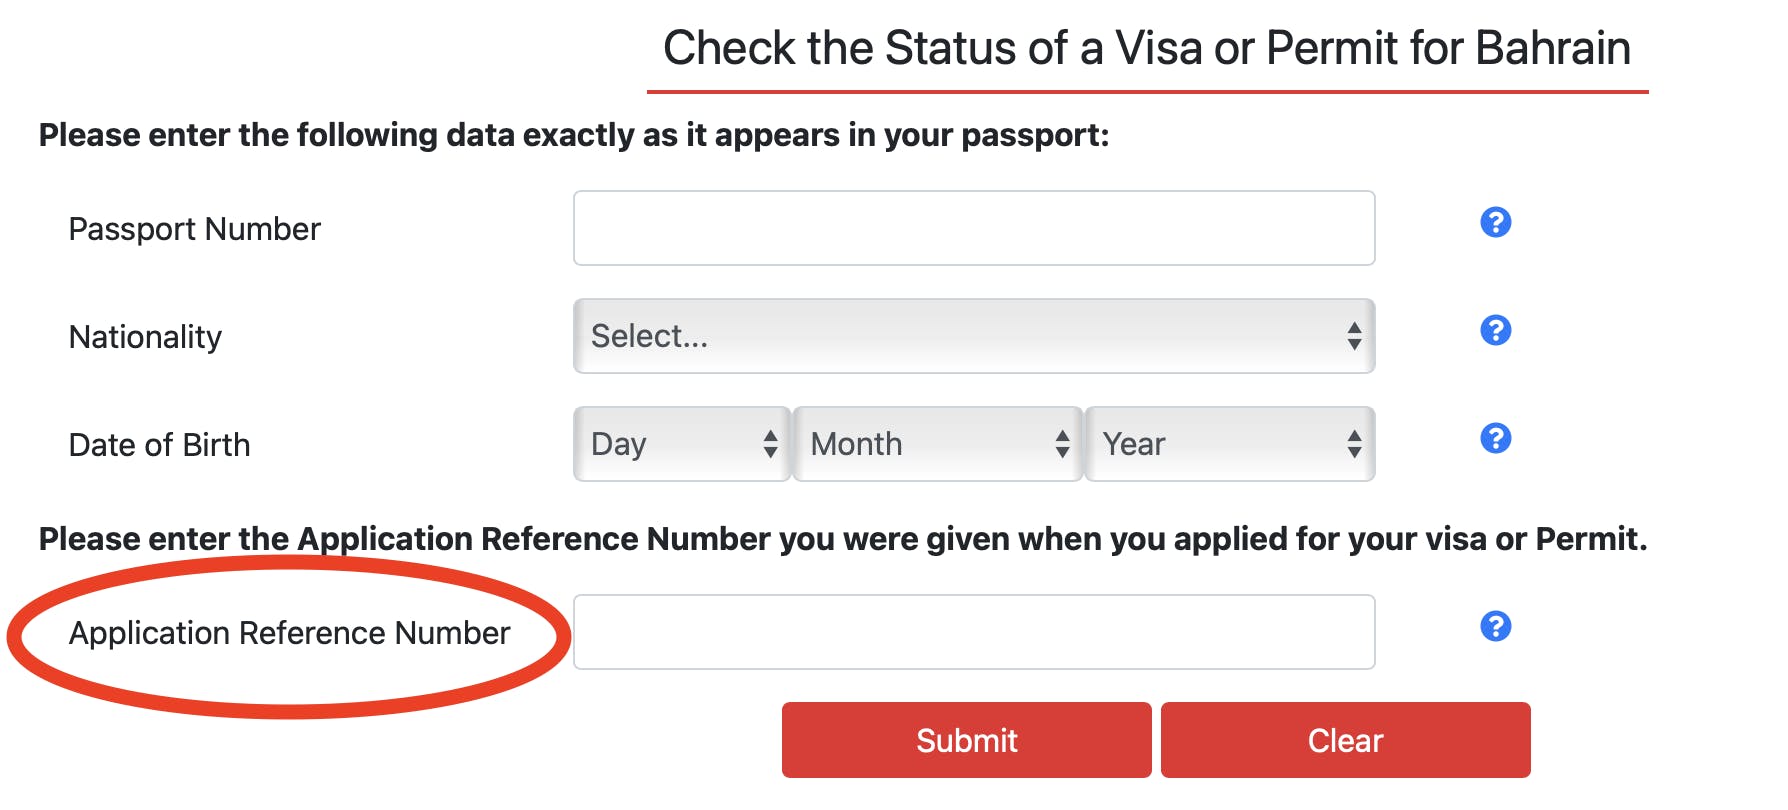 How to check your Bahrain visa status with your application number.